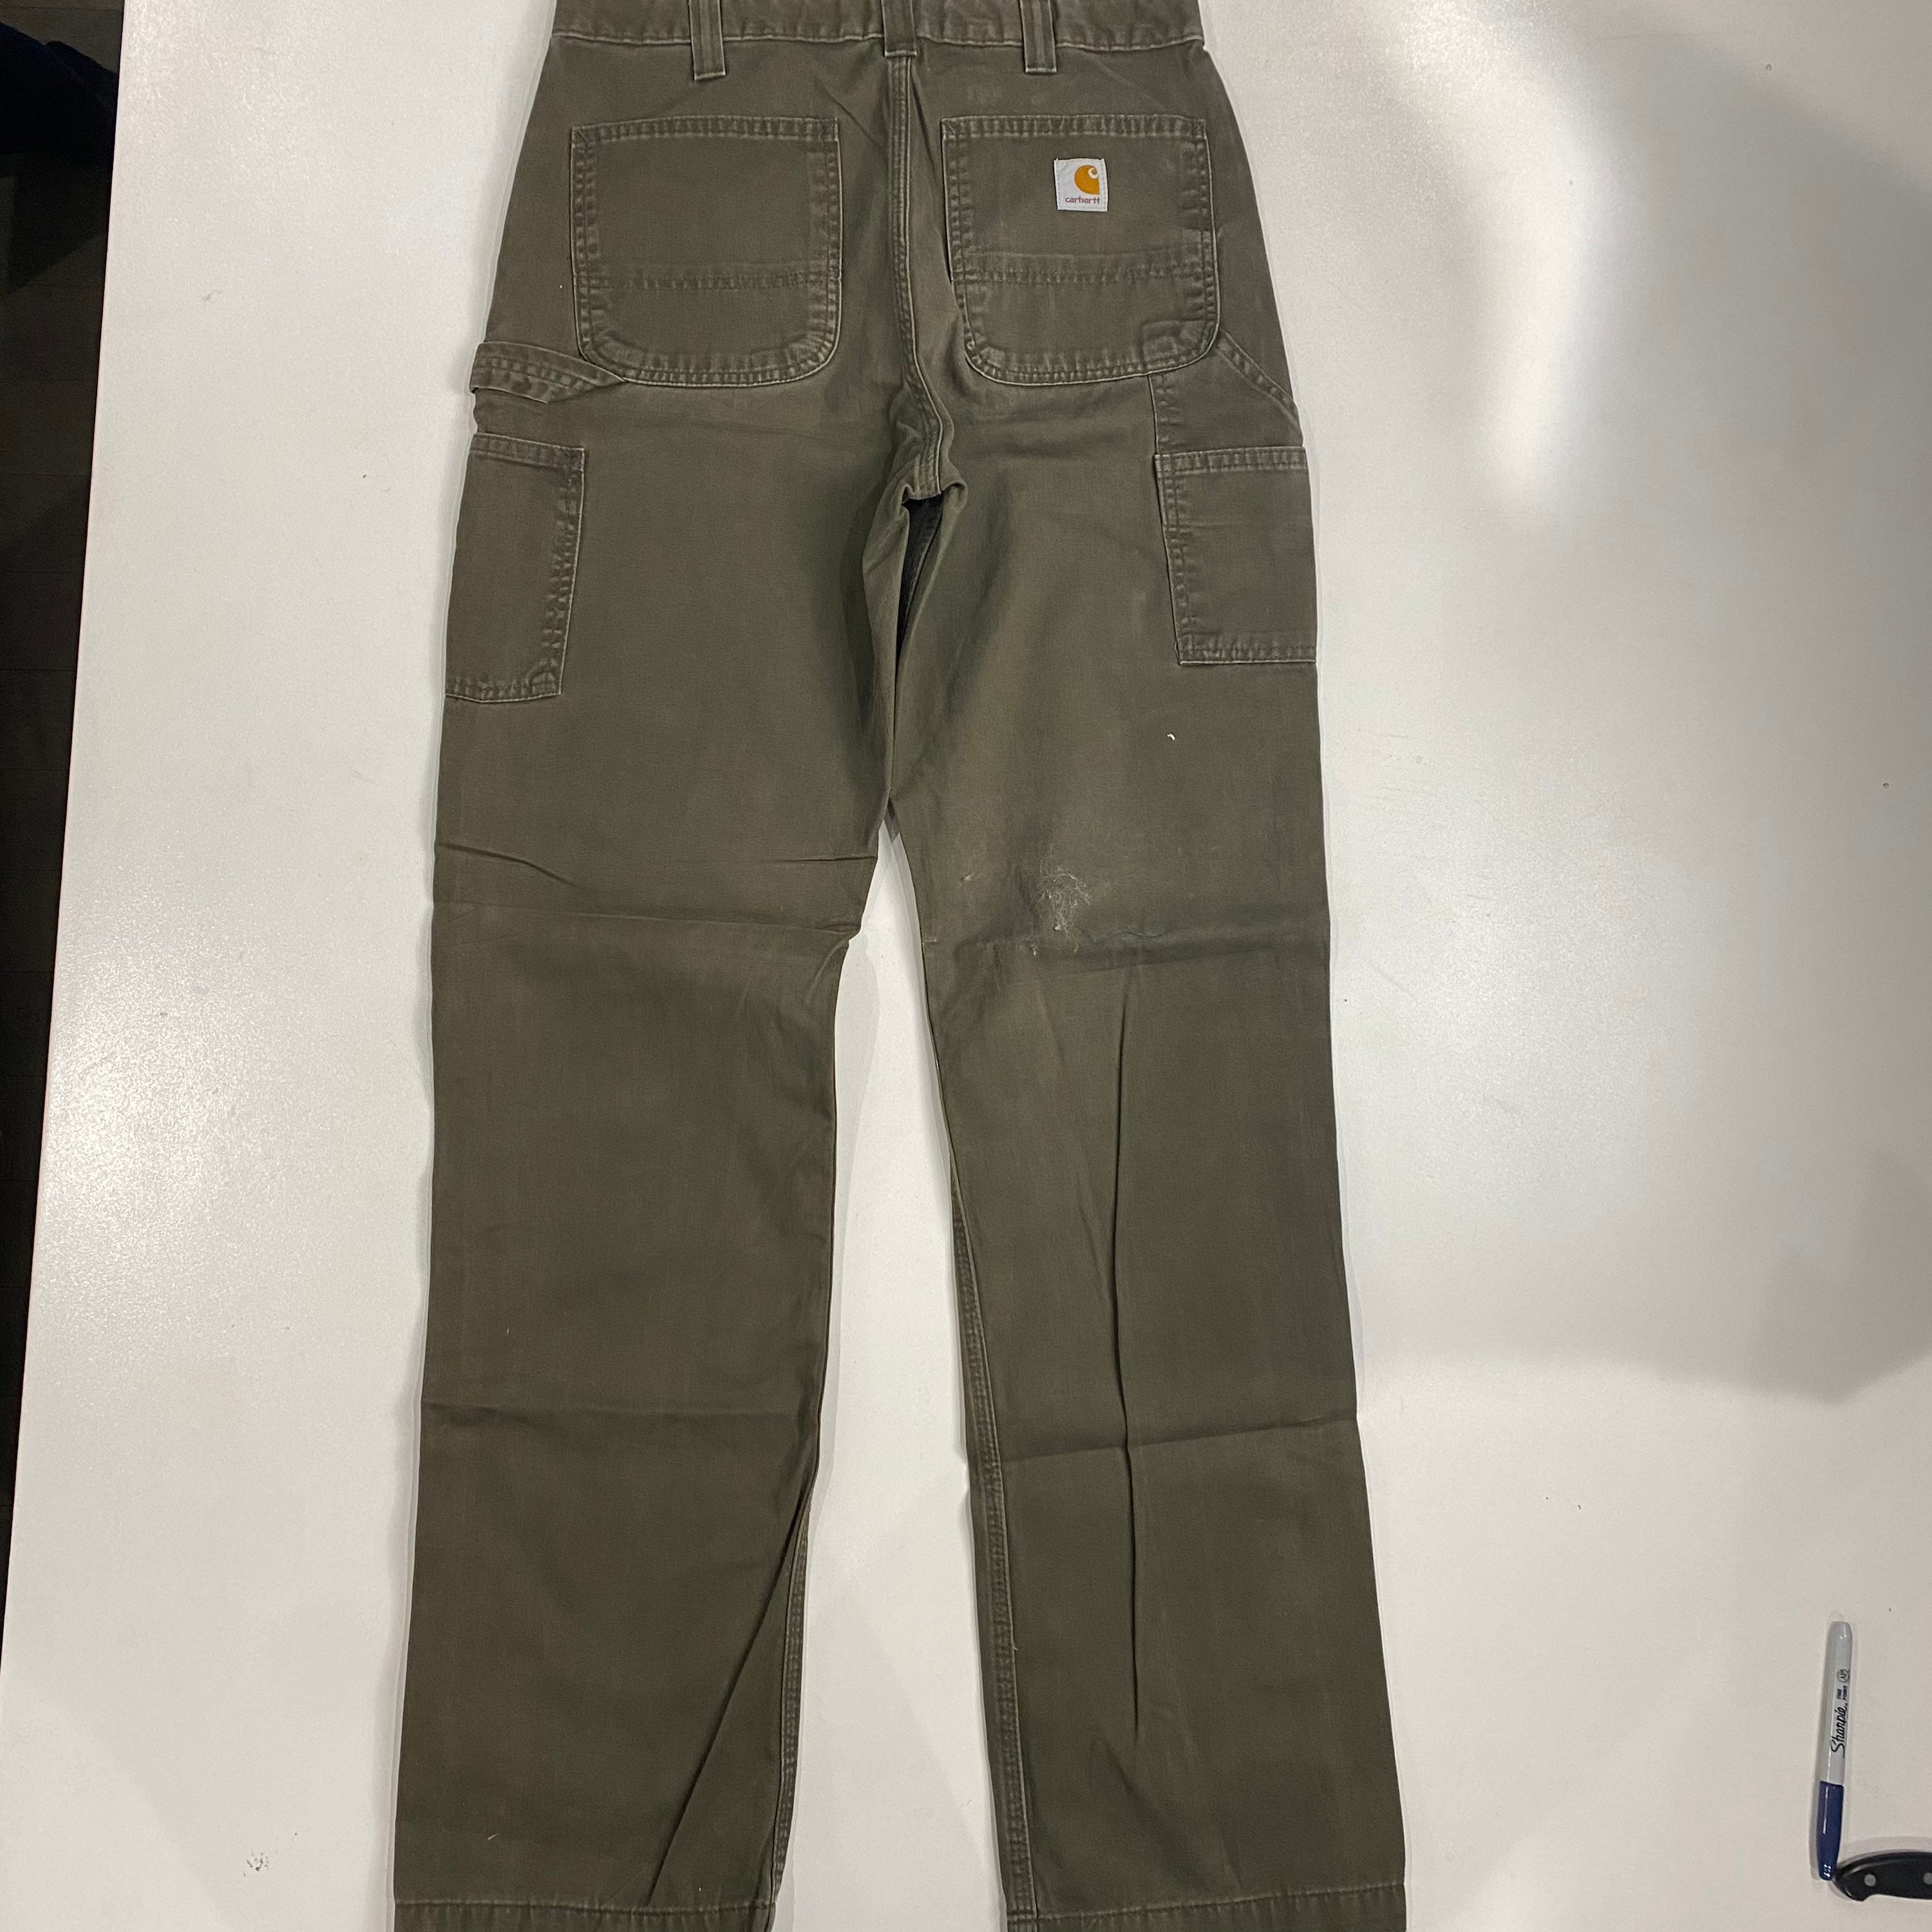 Carhartt Green Relaxed Fit Work Pants Size 33 x 36 B324 DFE | Etsy